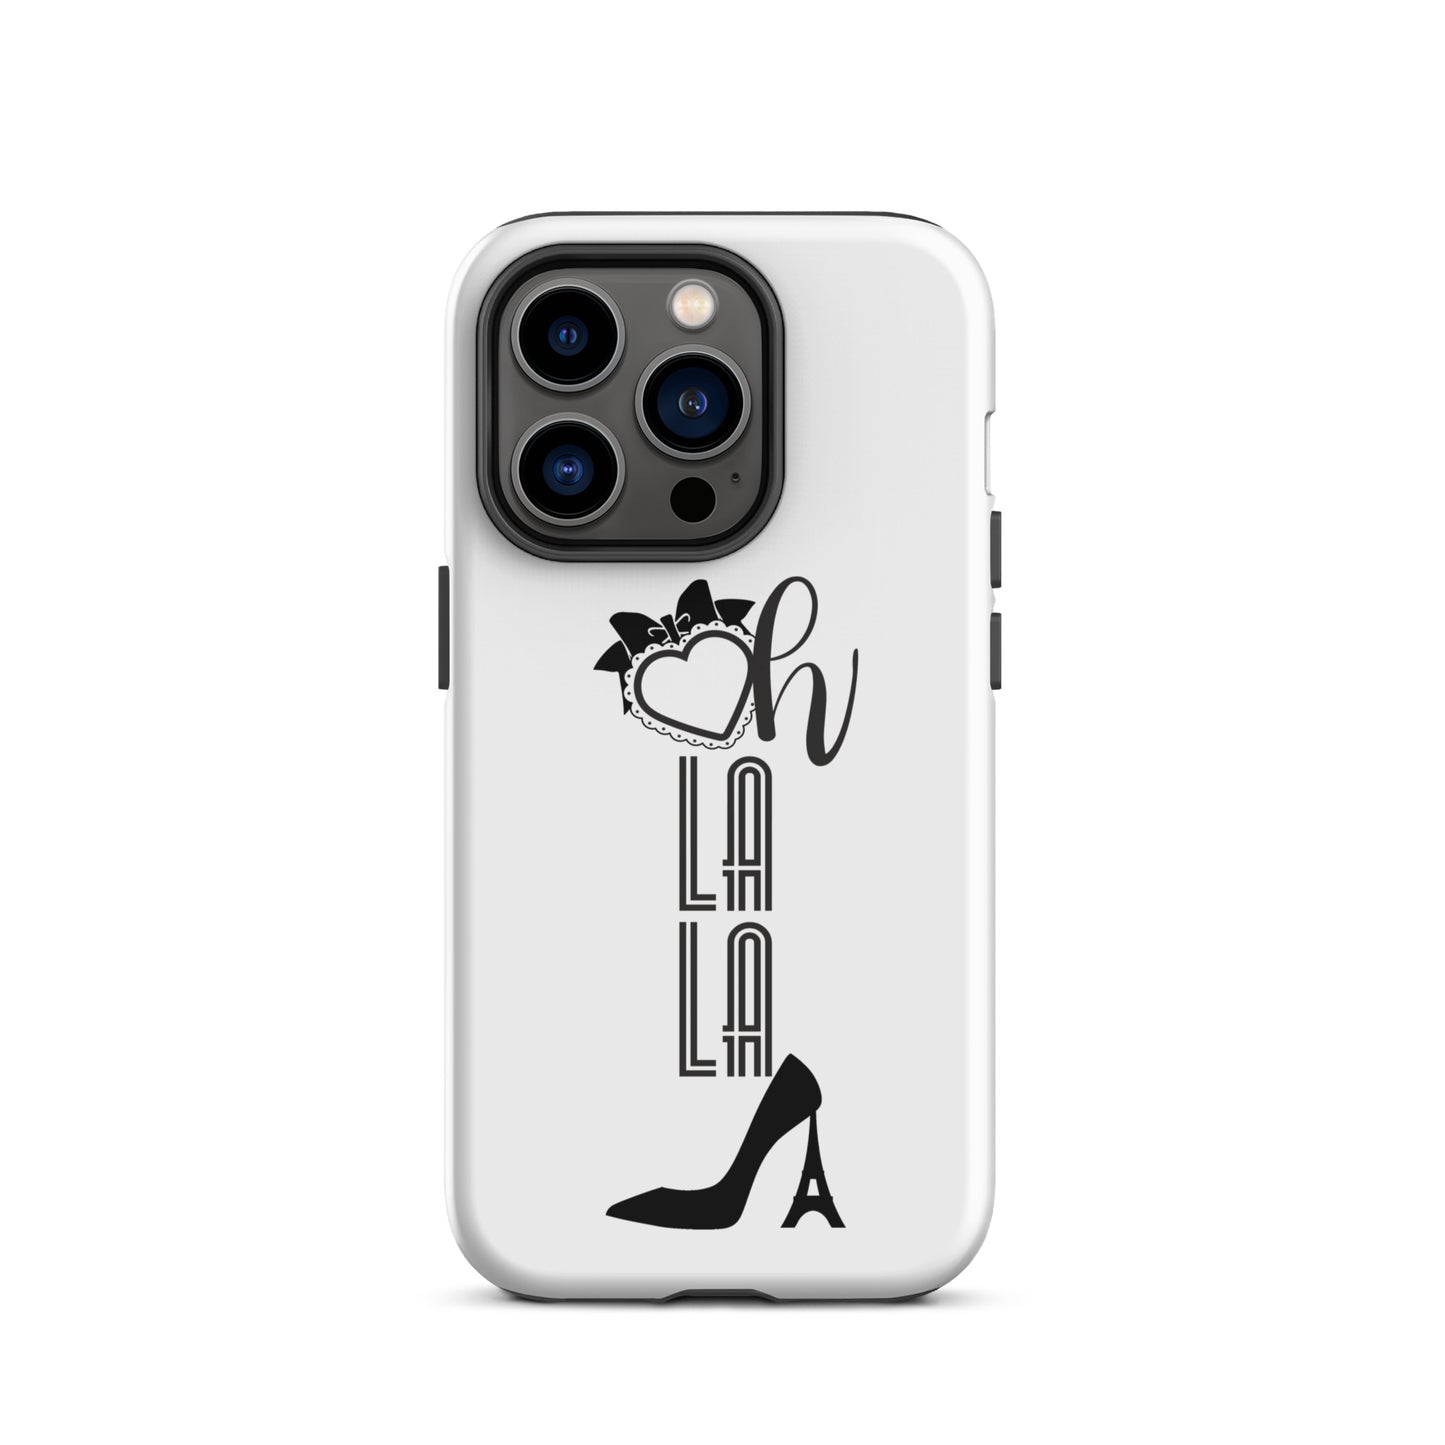 ♡ Oh la la ♡ case for iPhone 13 and 14